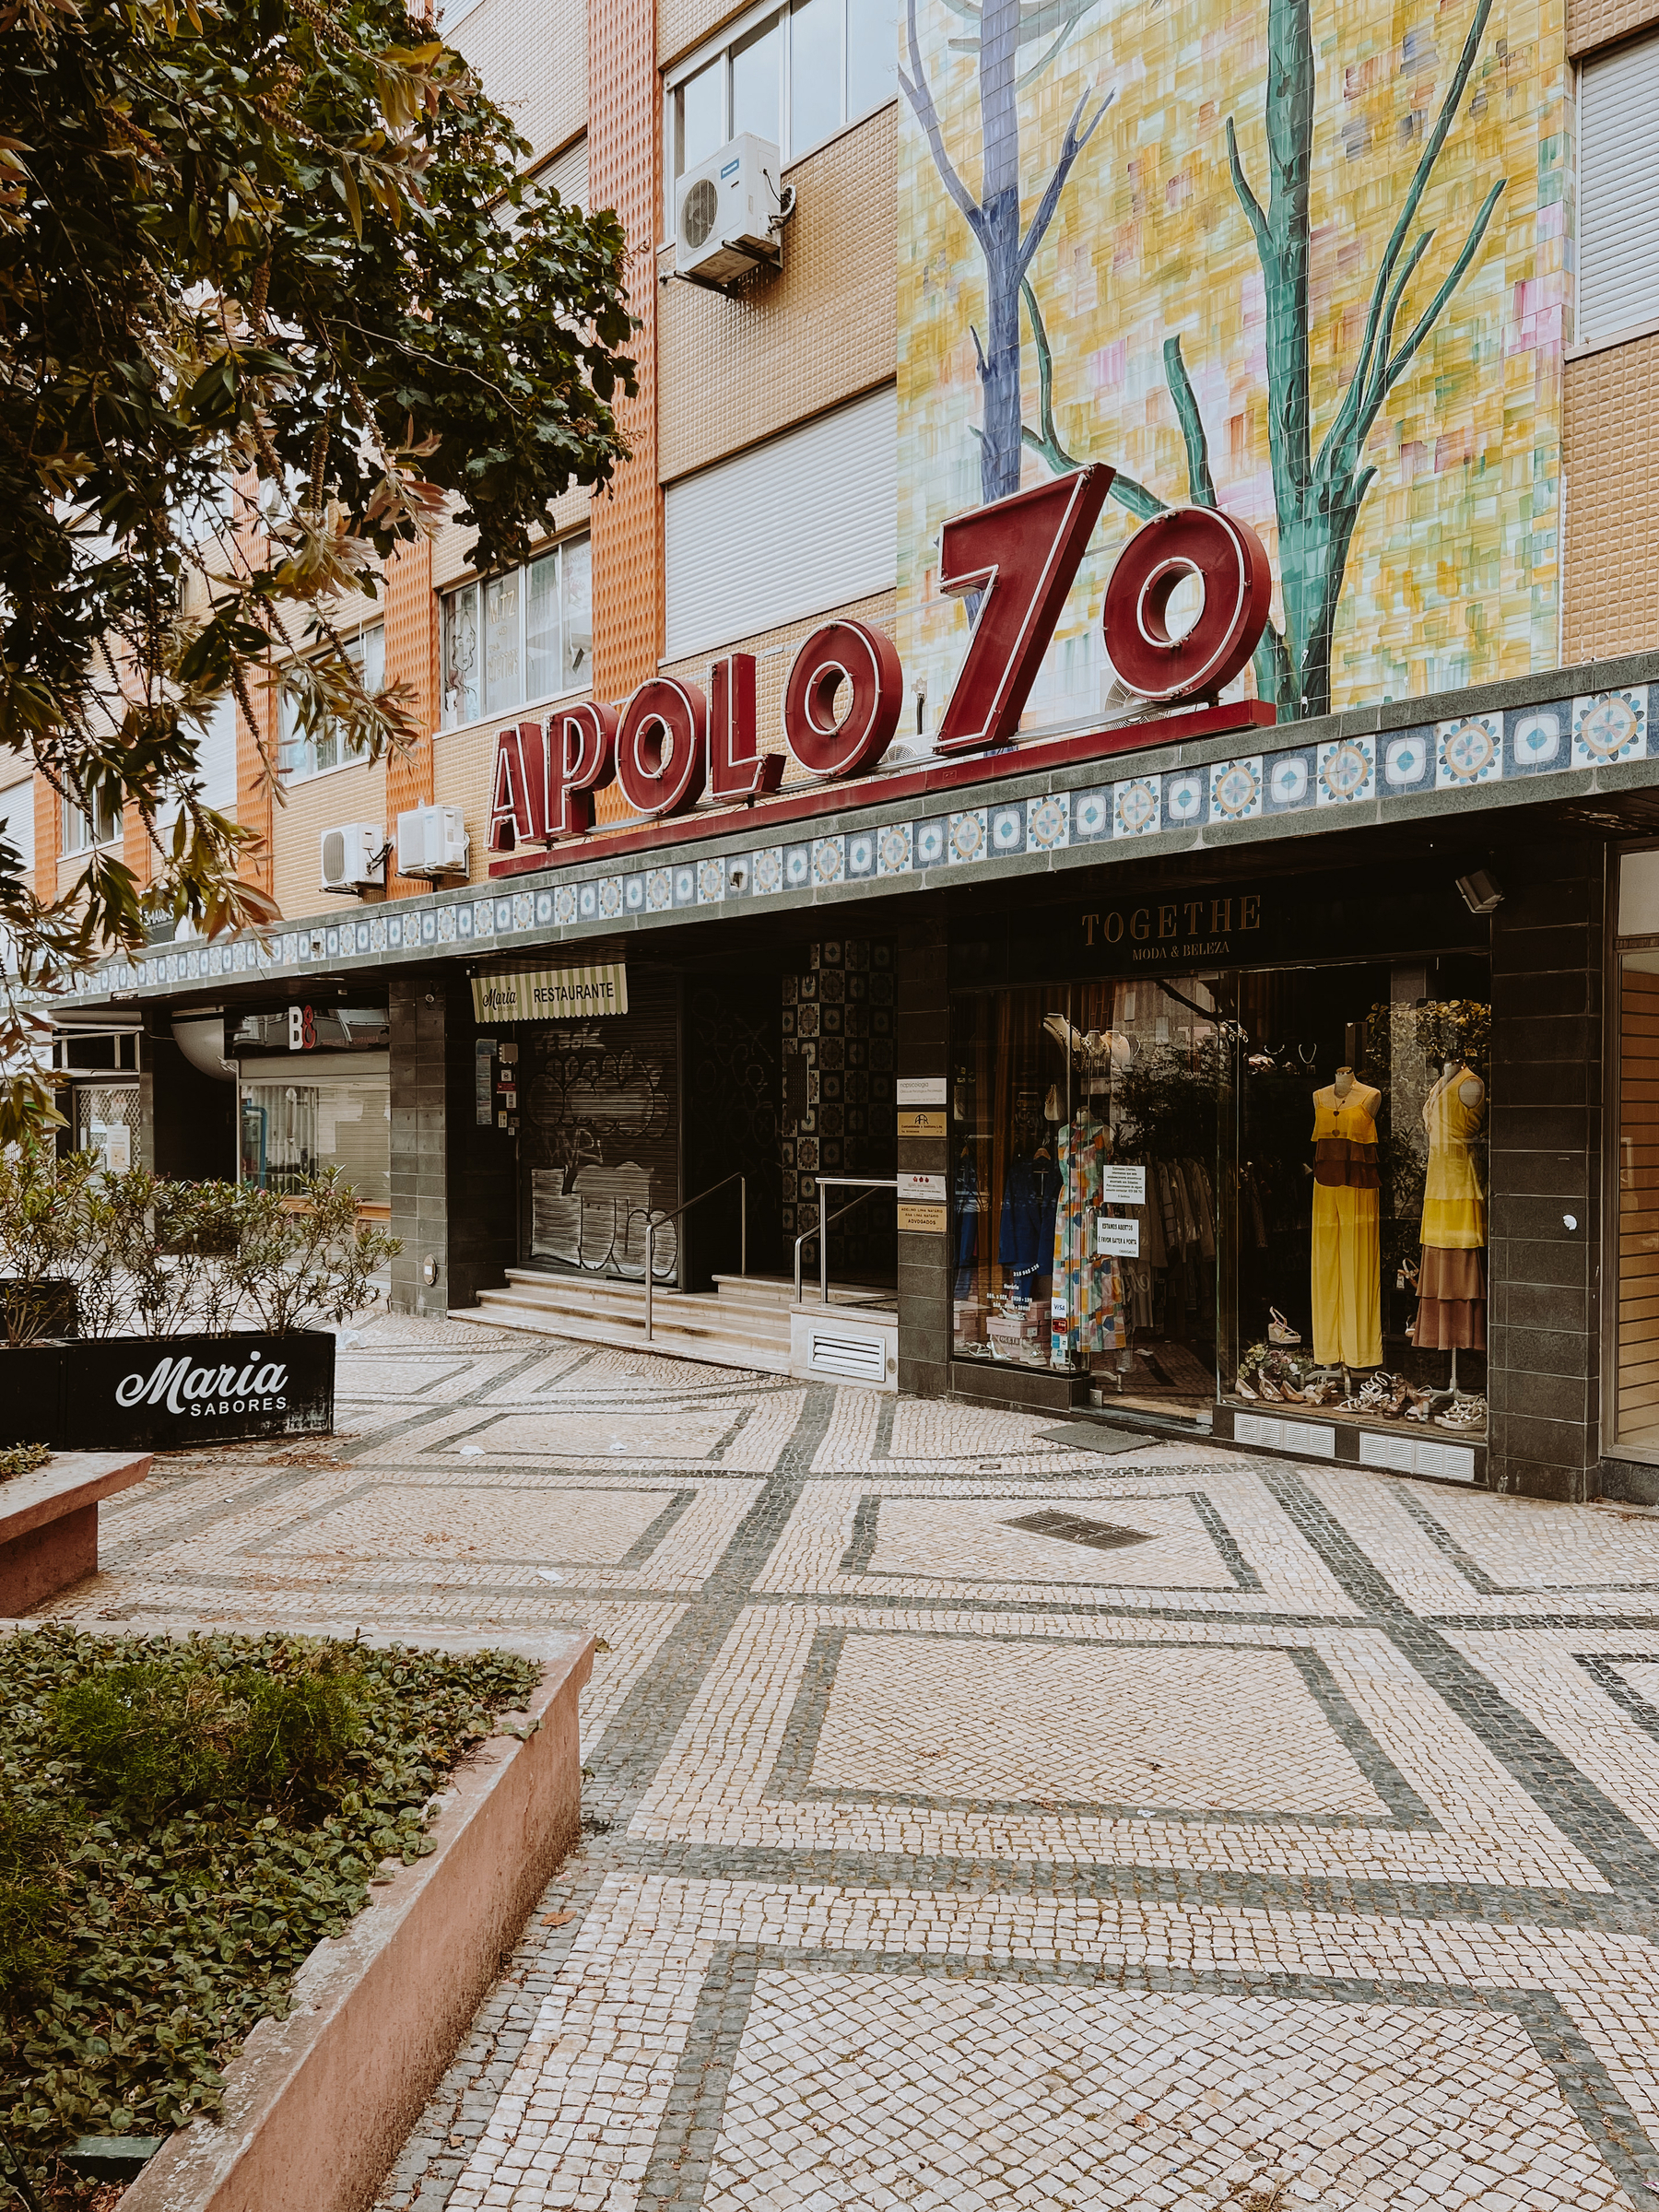 “Apolo 70”, a classic drugstore in town. Vintage looking font on the display, vintage tiles on the facade. 